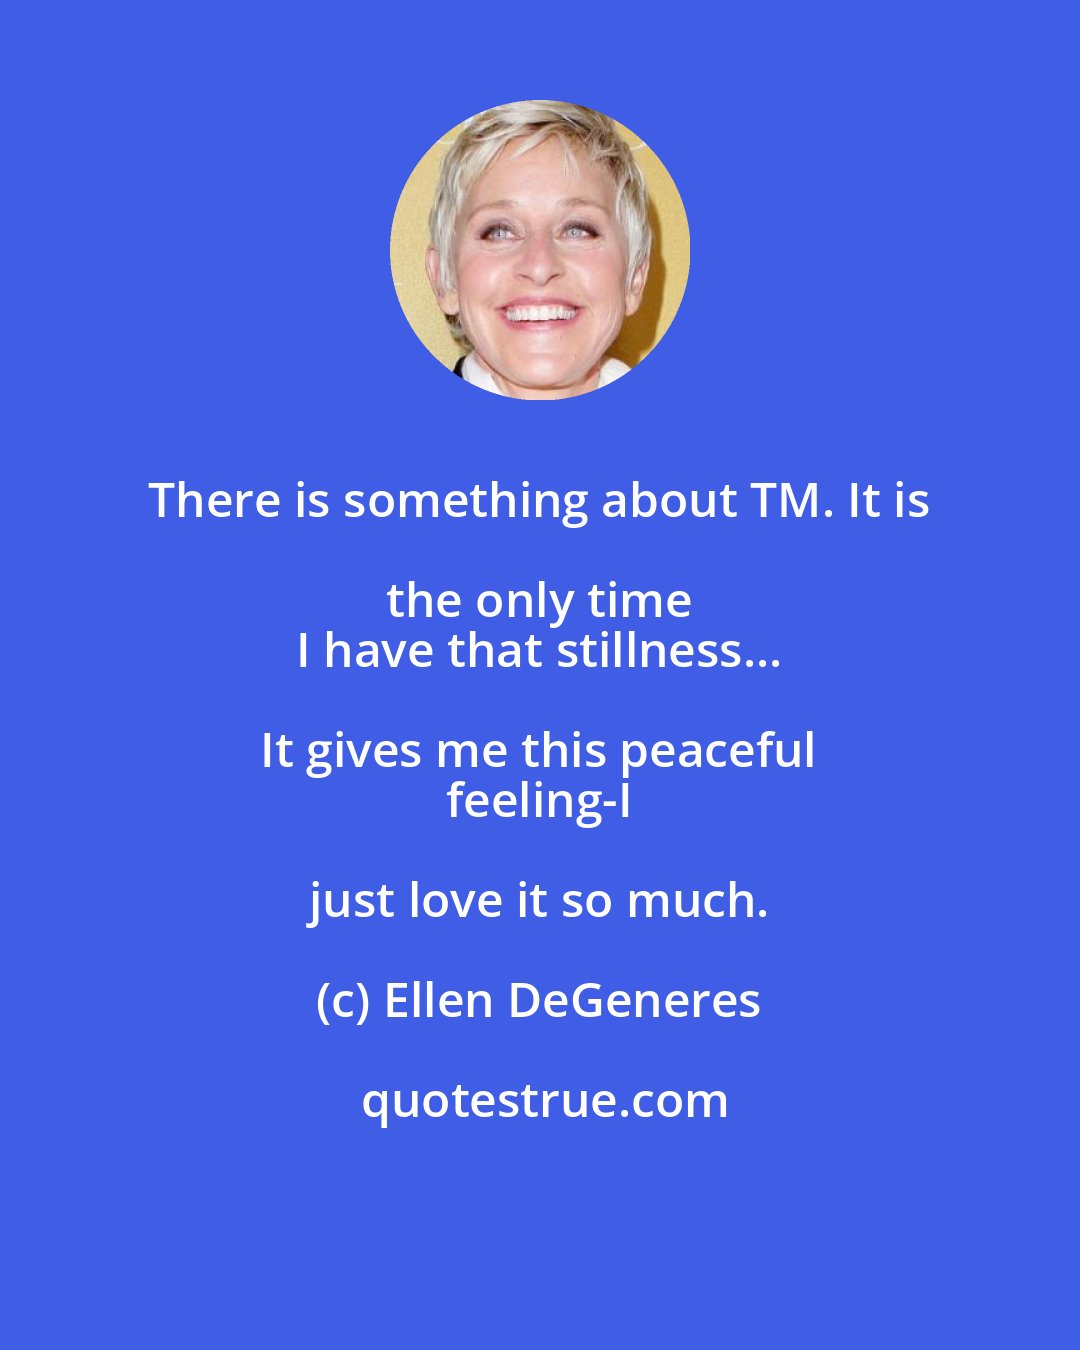 Ellen DeGeneres: There is something about TM. It is the only time 
 I have that stillness... It gives me this peaceful 
 feeling-I just love it so much.